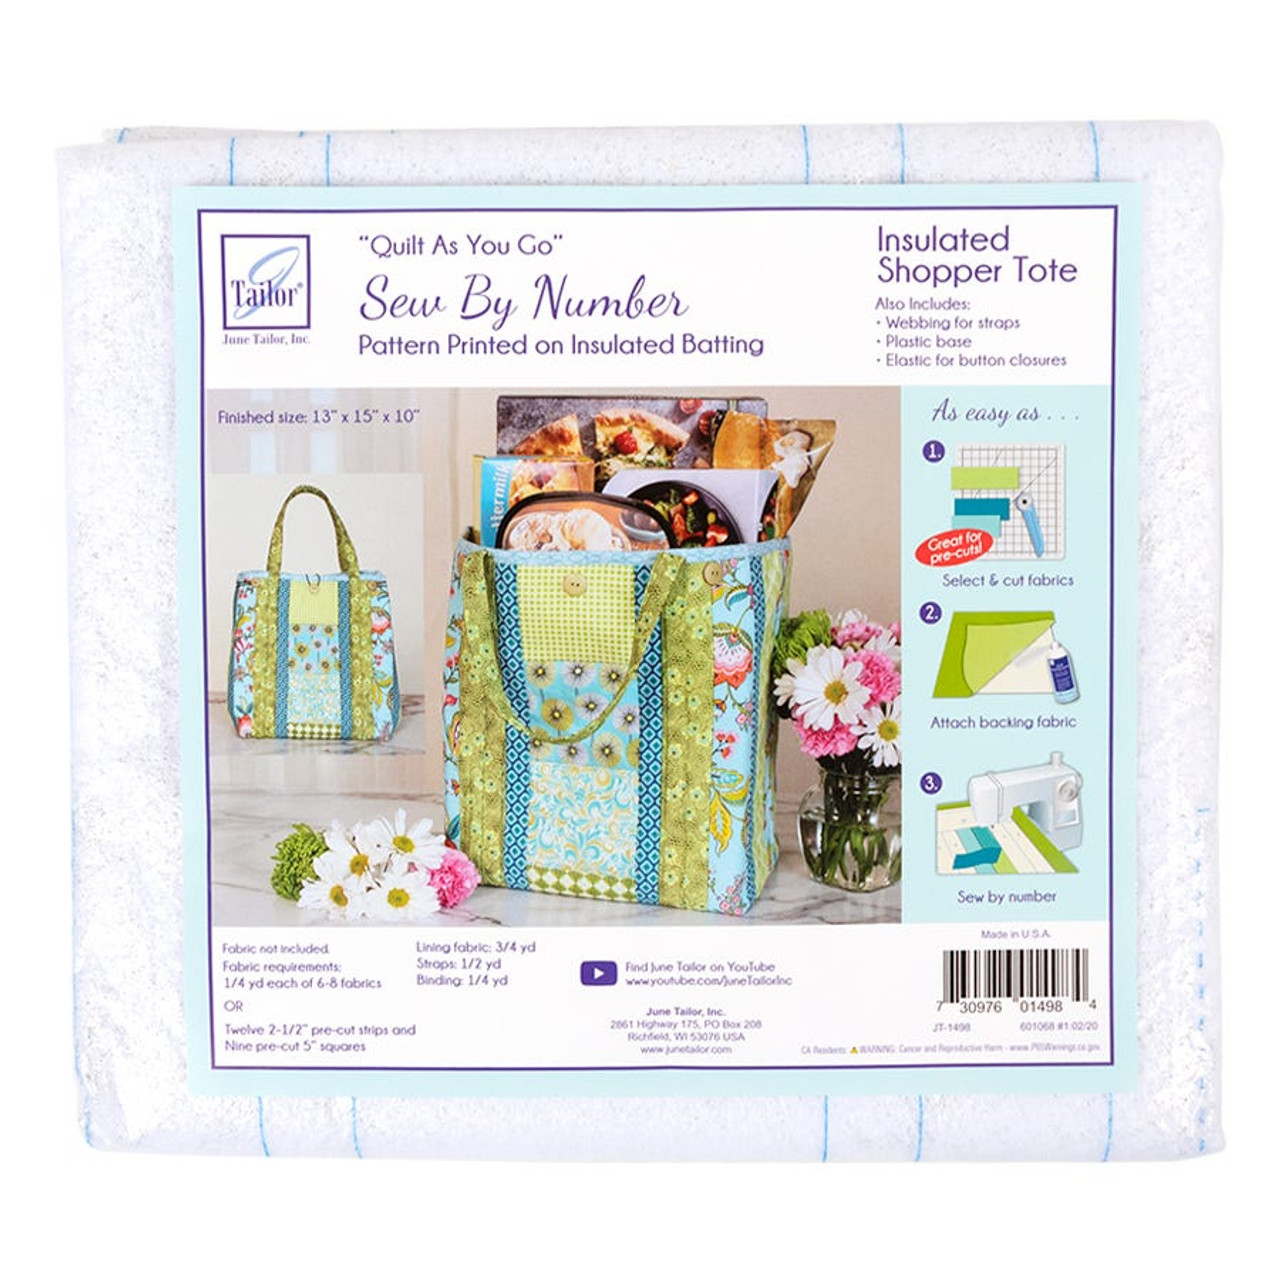 June Tailor Quilt As You Go Tote Bag-Tori 15 X14 X14, 1 count